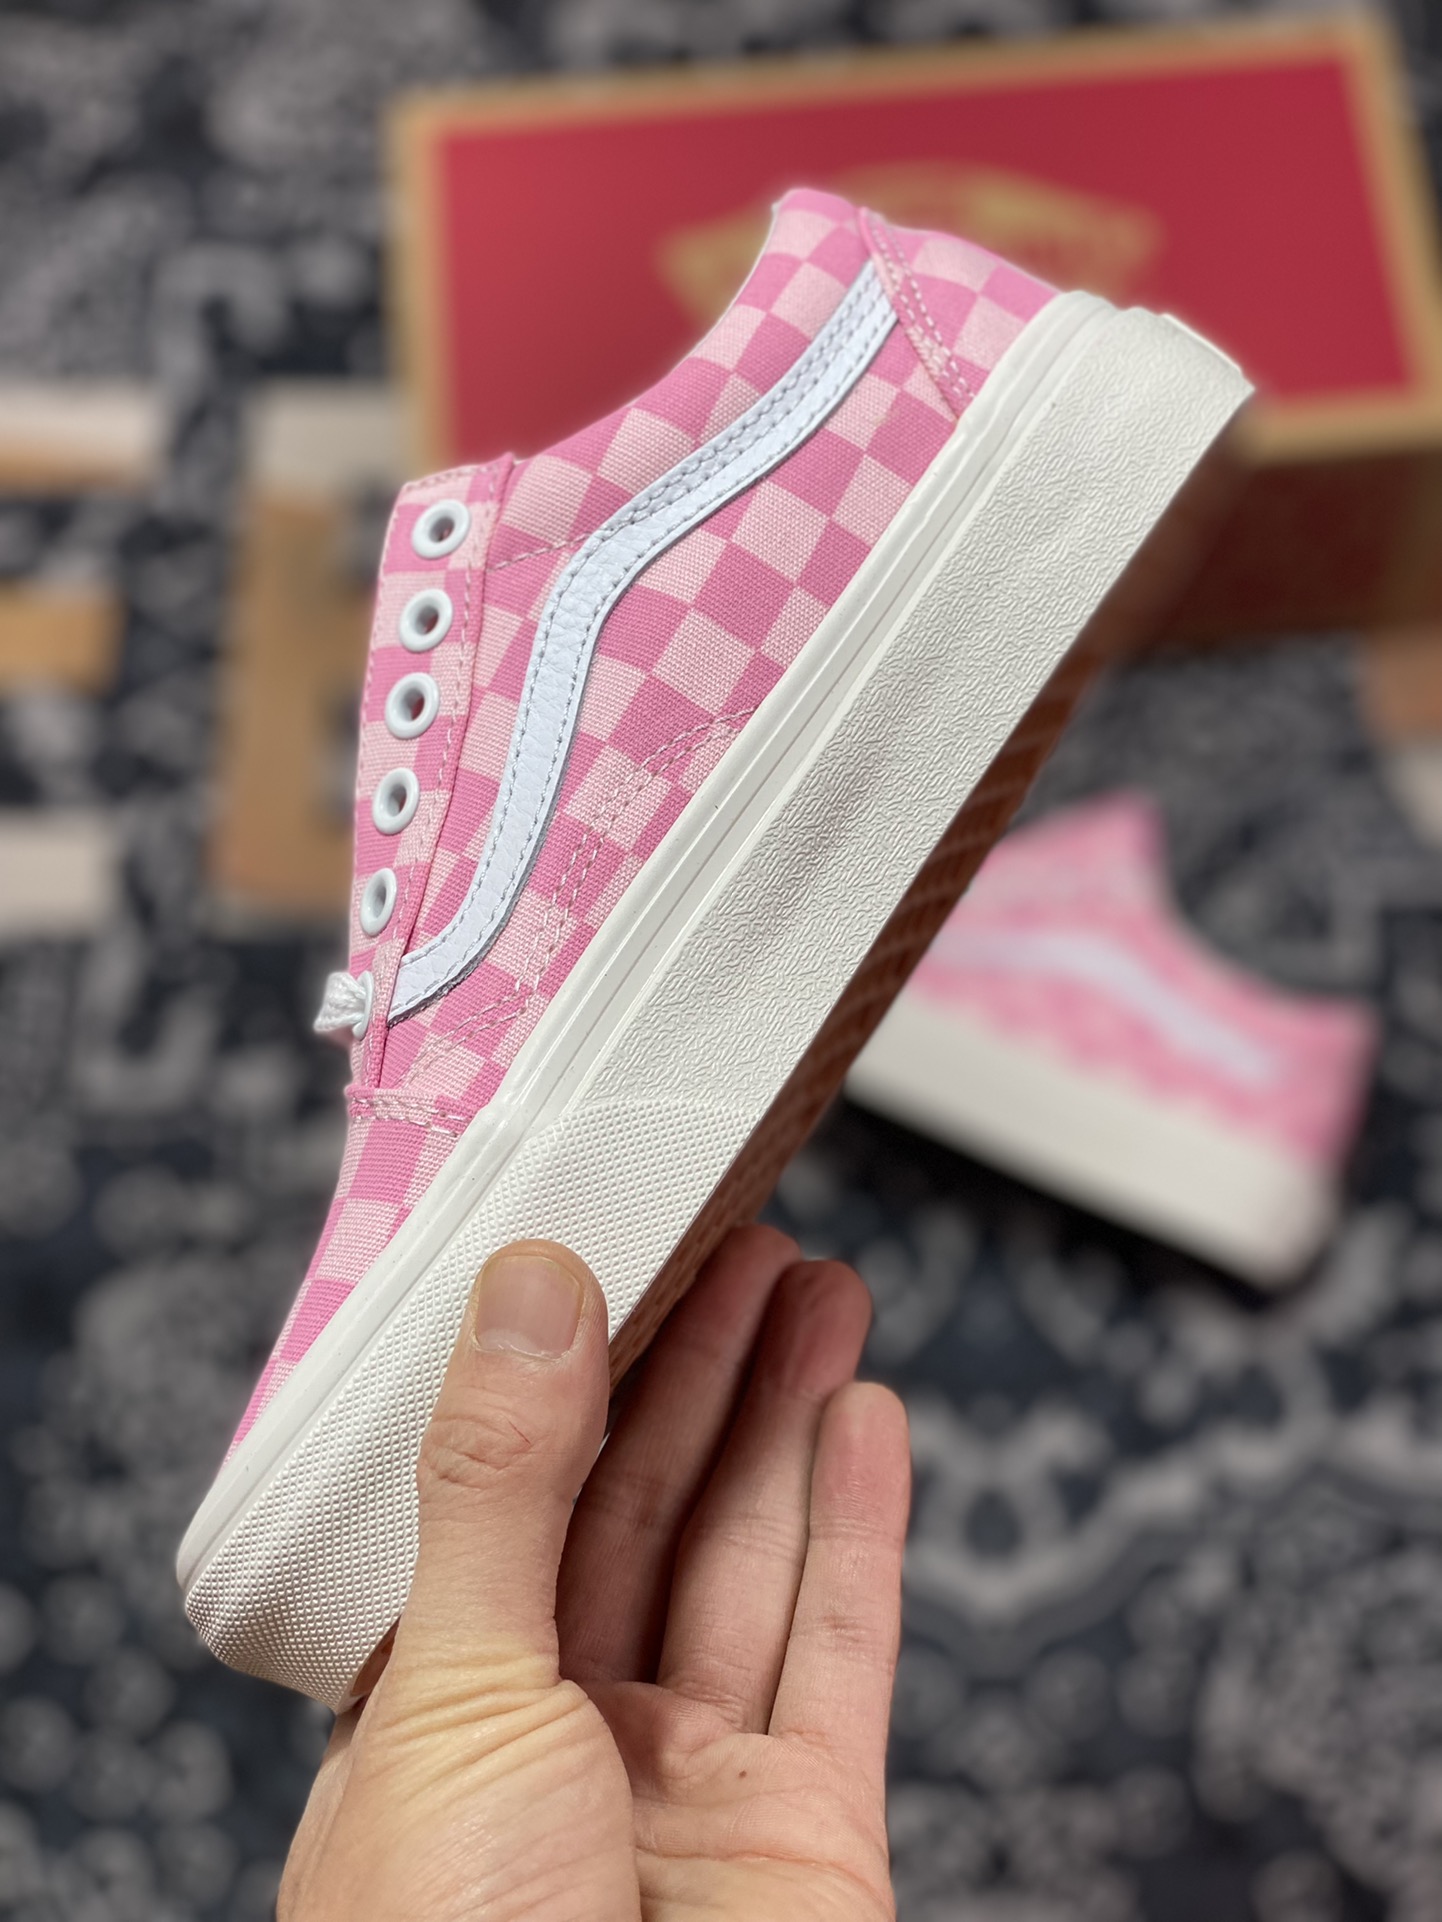 Vans Old Skool cherry blossom pink checkerboard Vans official casual canvas vulcanized shoes VN0A7Q2JZY2